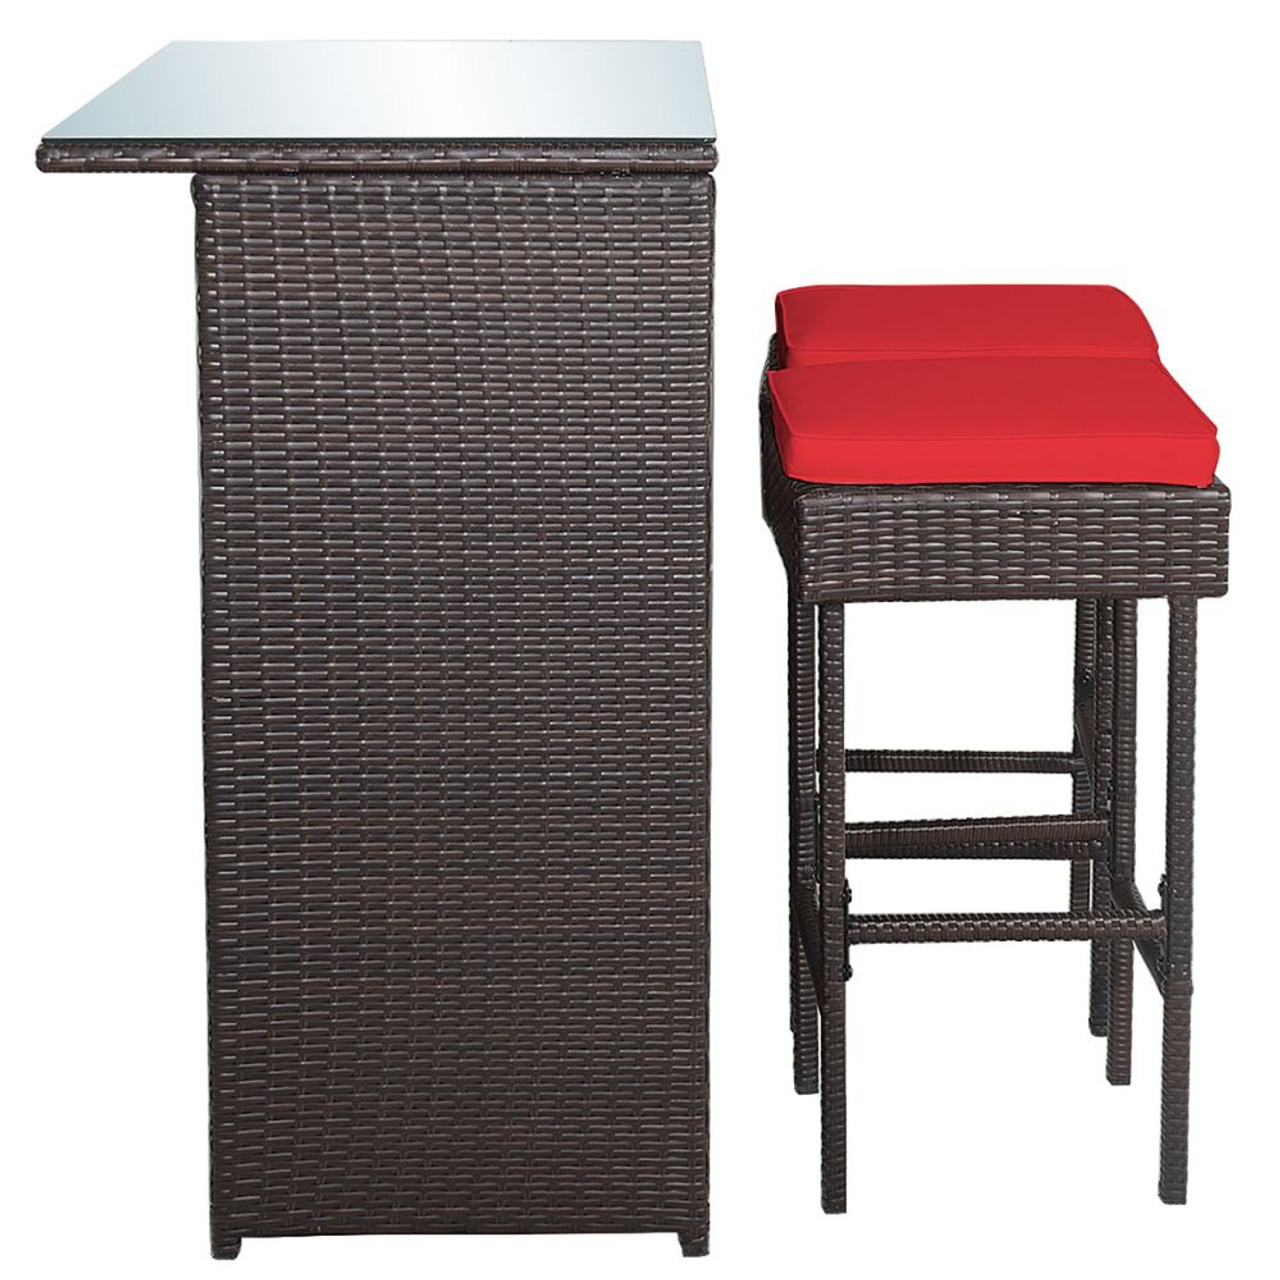 3-Piece Outdoor Rattan Wicker Bar Set with 2 Cushion Stools product image